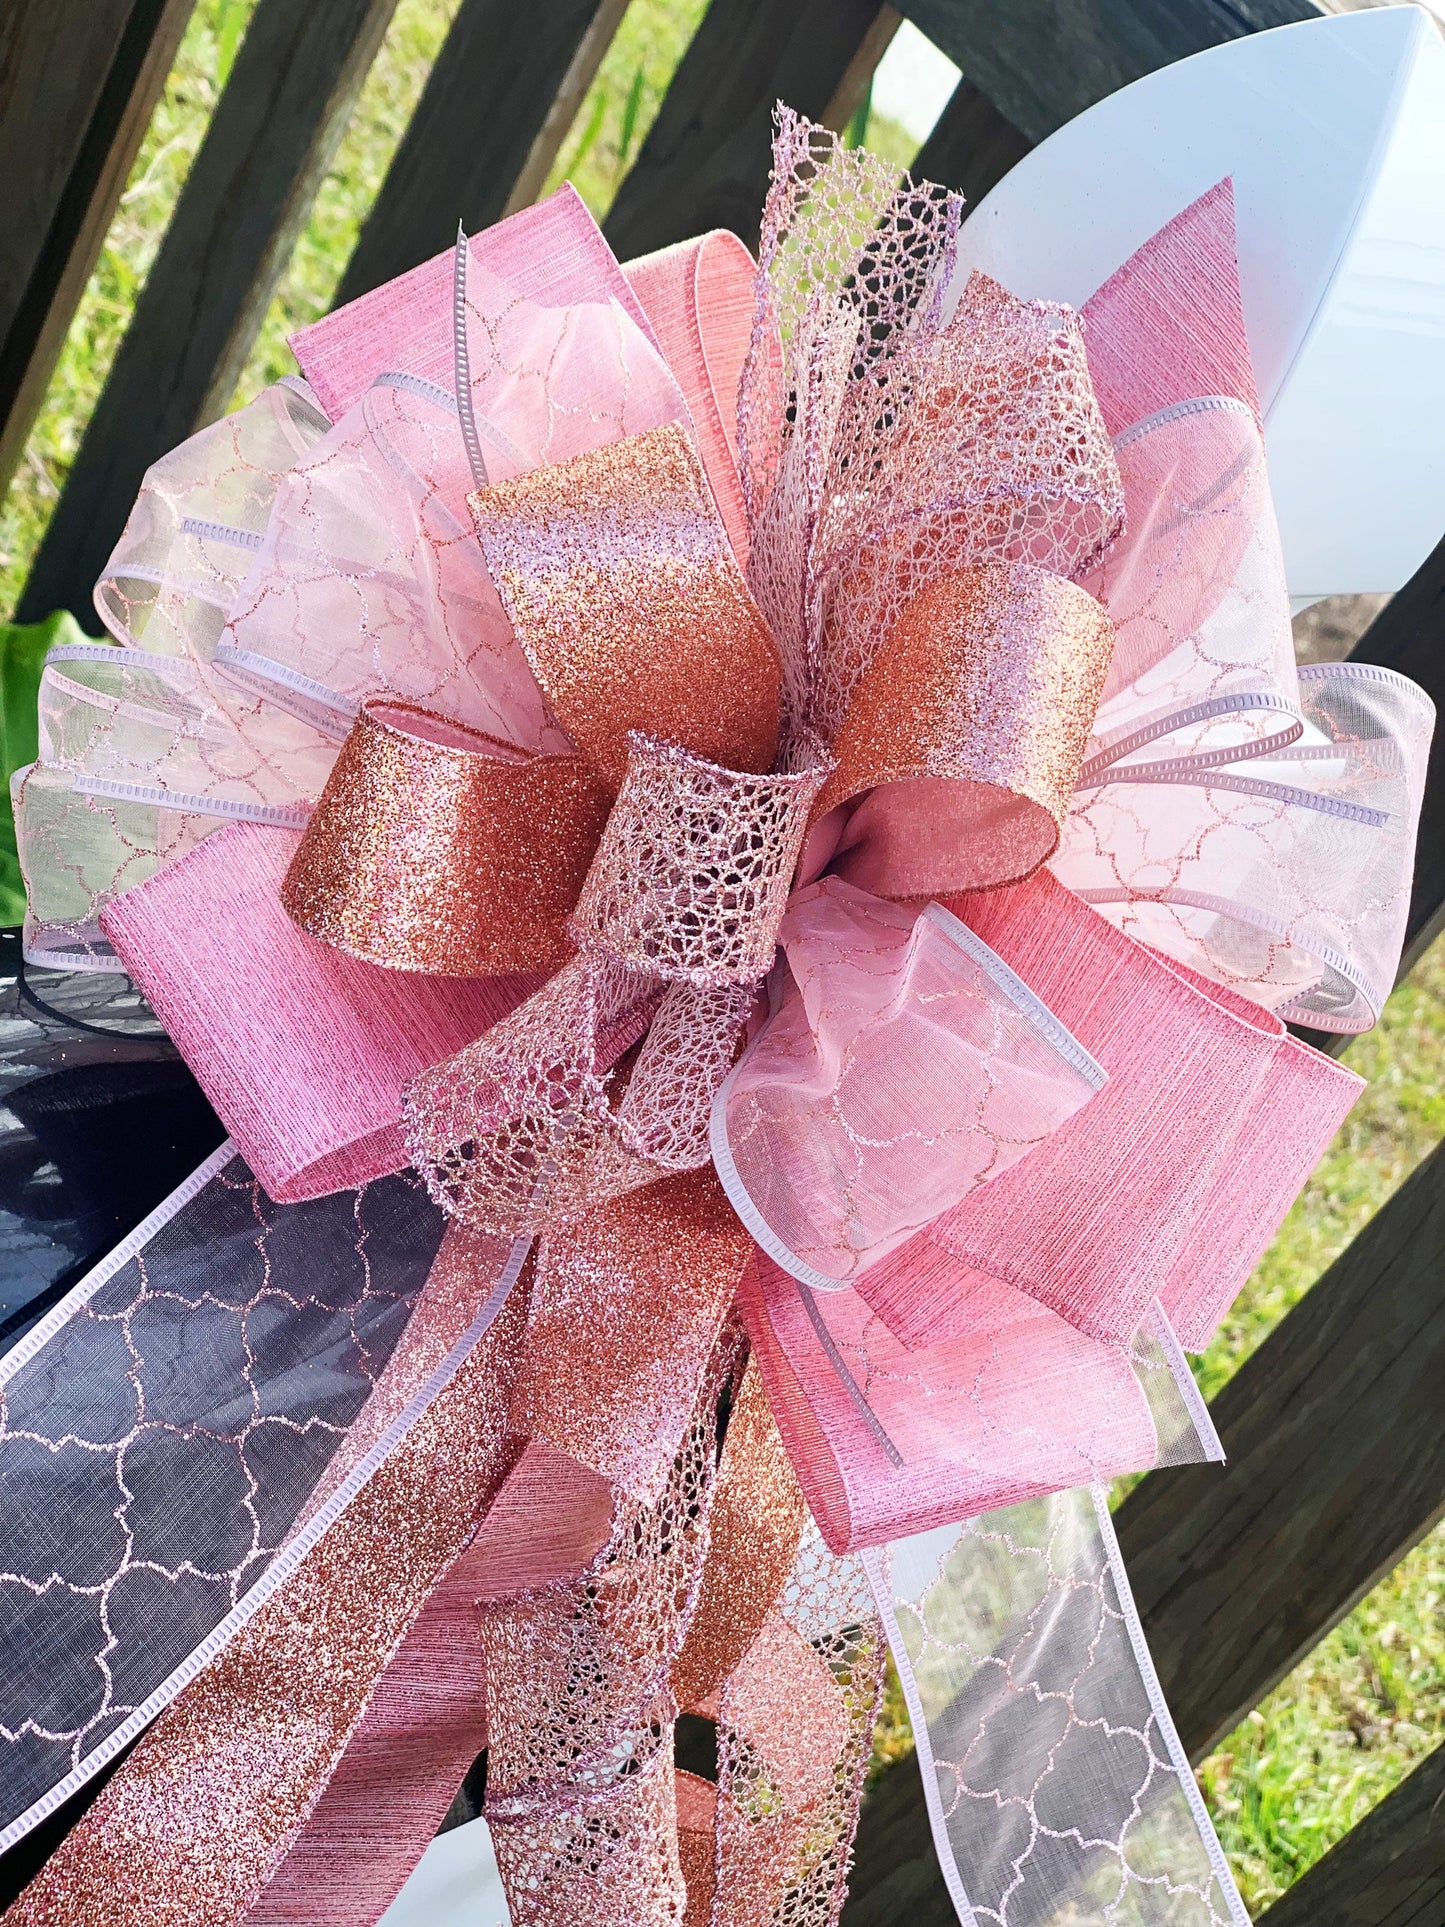 Everyday Collection - Rose Gold Bow, Rose Gold, Rose Gold Ribbon, Gift, Bow, Bows, Mailbox Bow, Wreath Bow, Large Bow, Ribbon